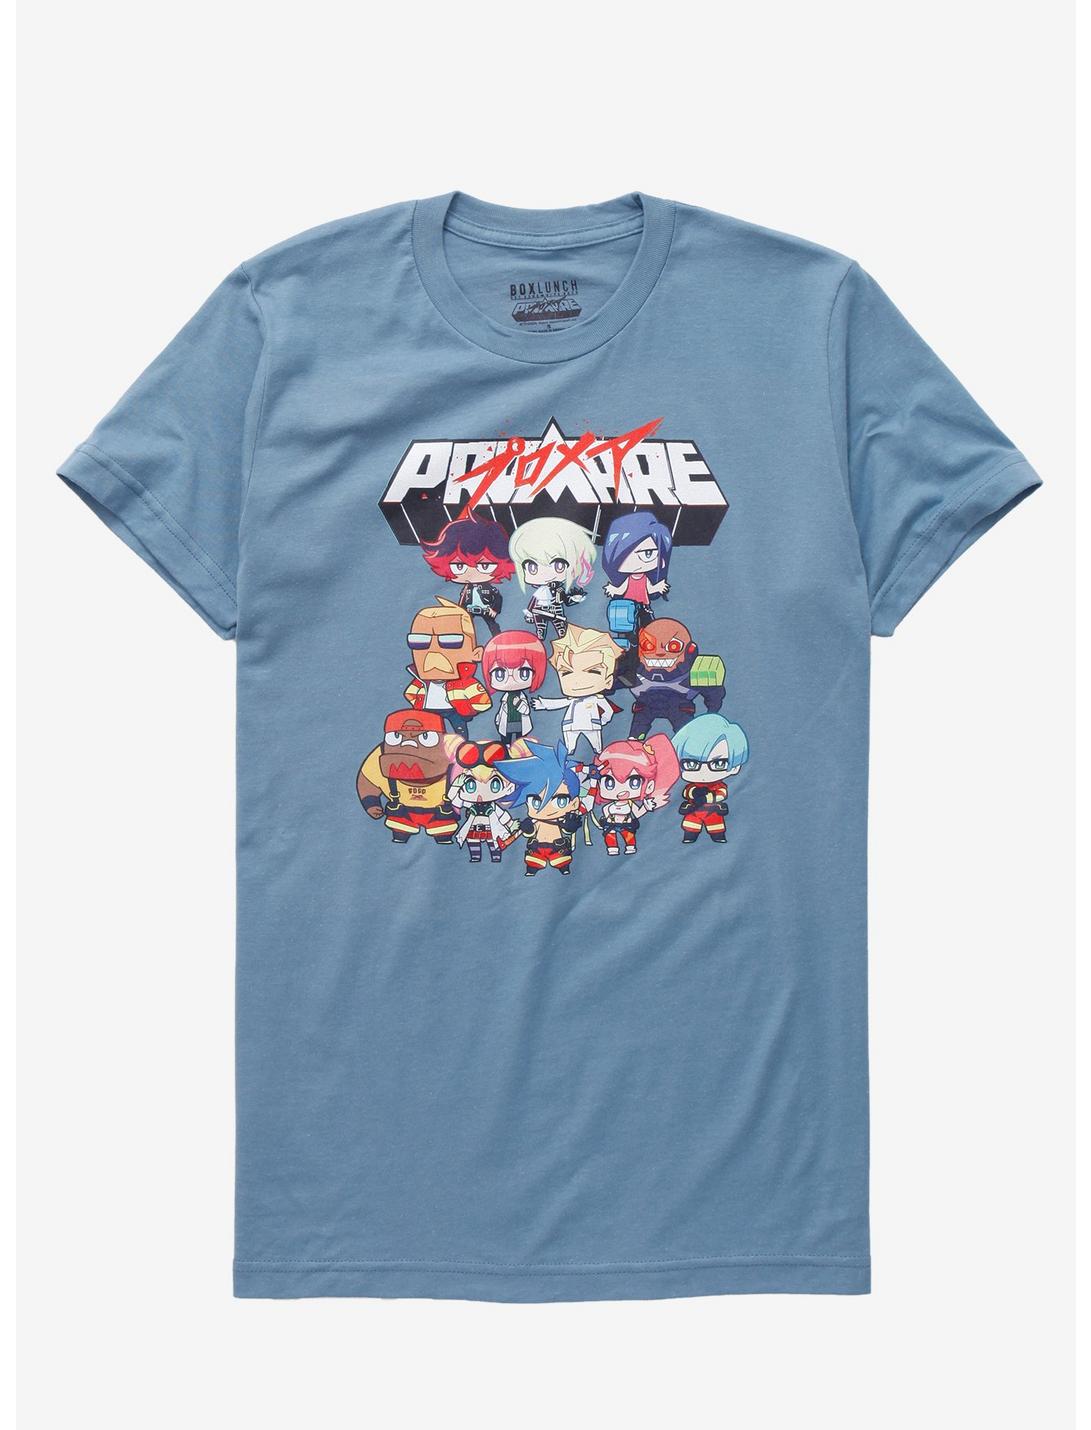 Promare Chibi Cast T-Shirt - BoxLunch Exclusive, TEAL BLUE, hi-res